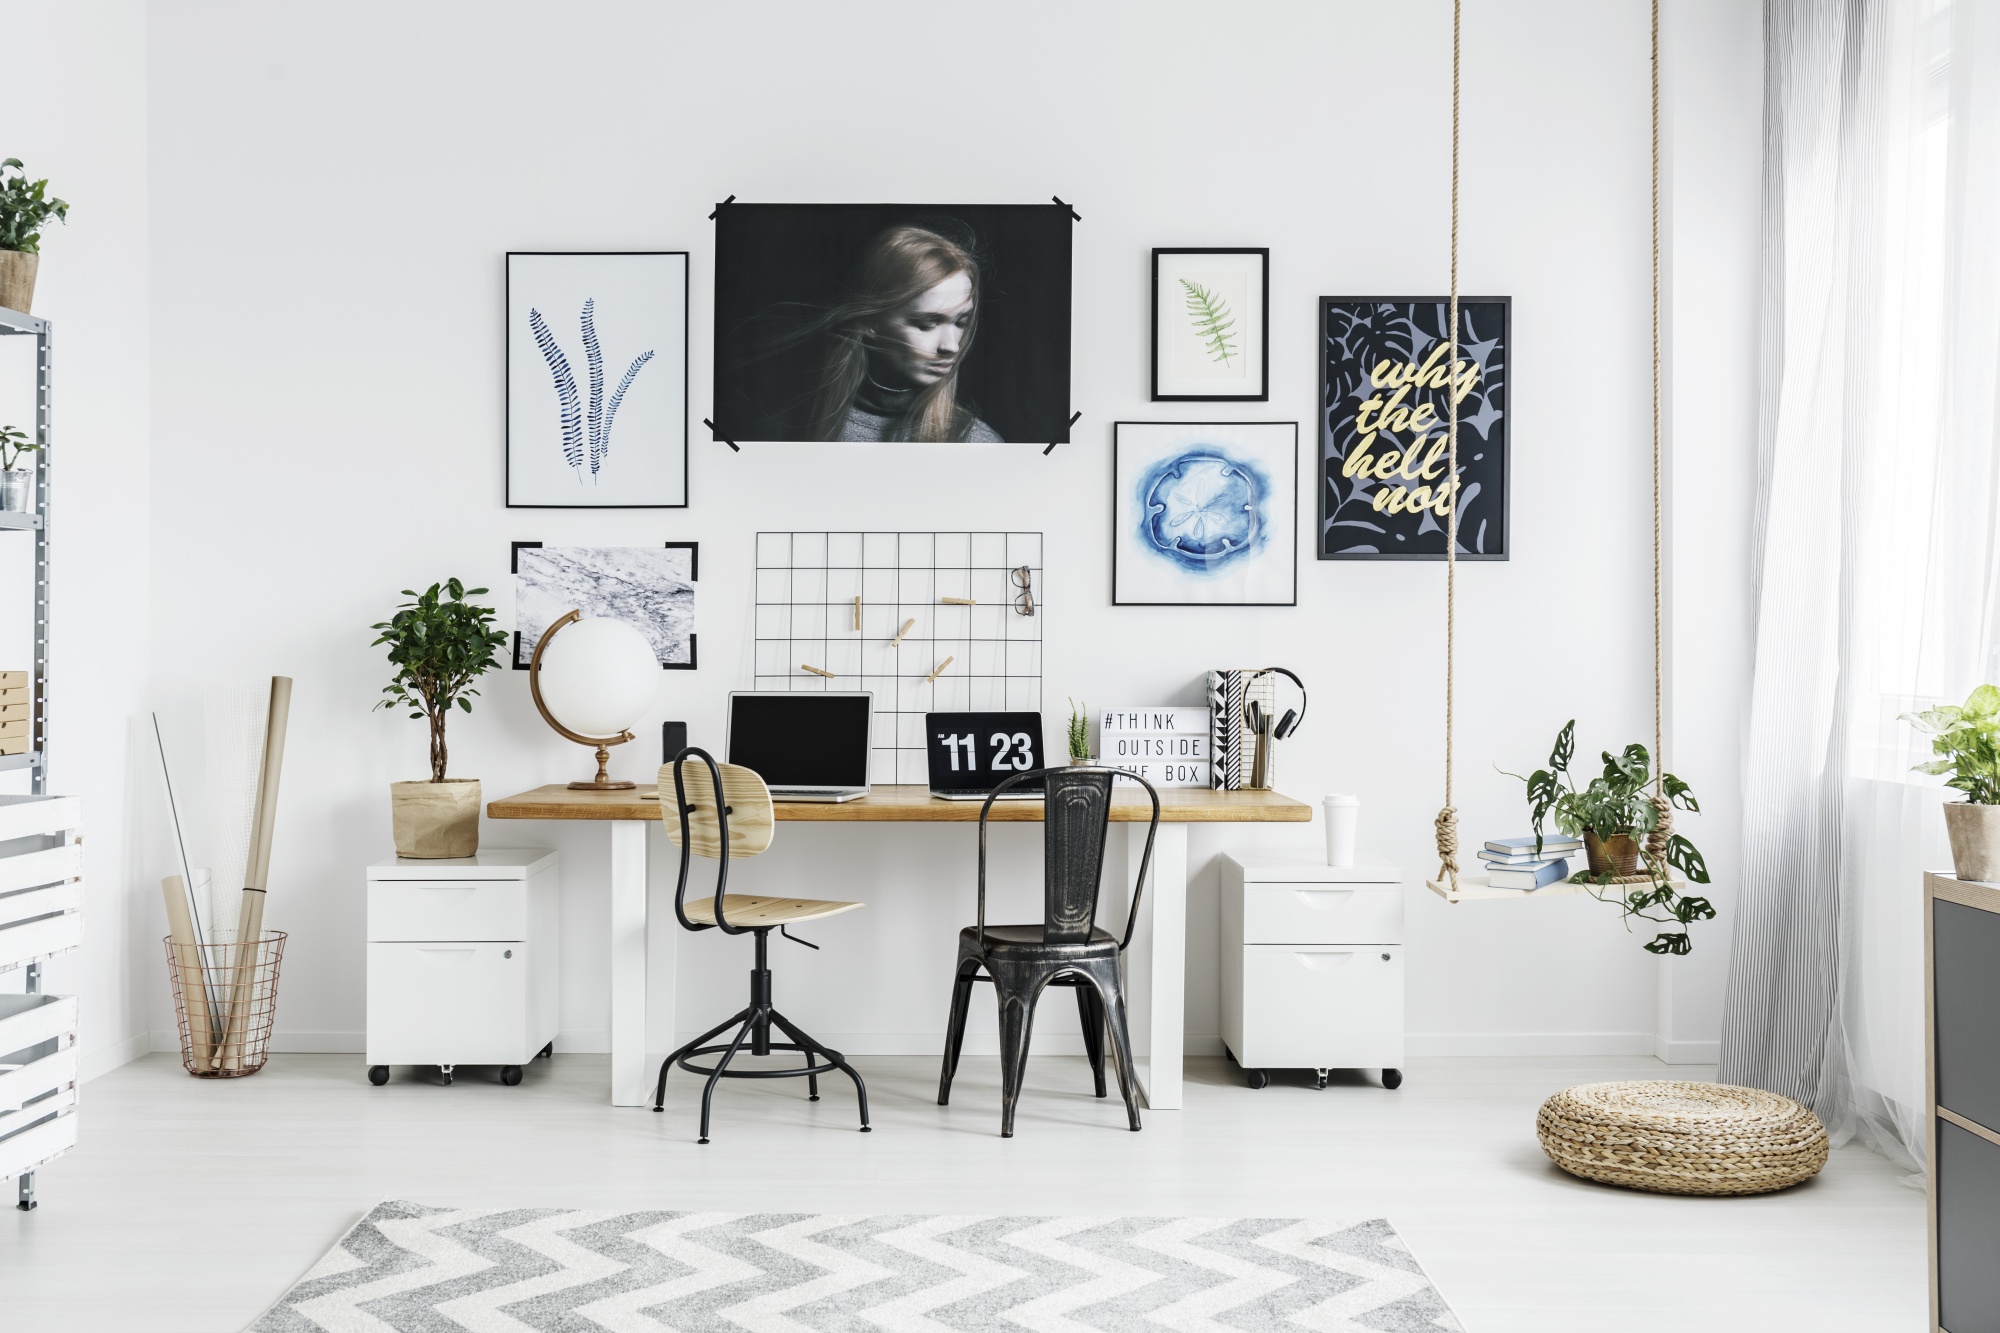 5 Easy Steps To The Perfect and Unique Gallery Wall in an office space with clean lines and neutral tones including a swing used as a planter, posters, art and peg board